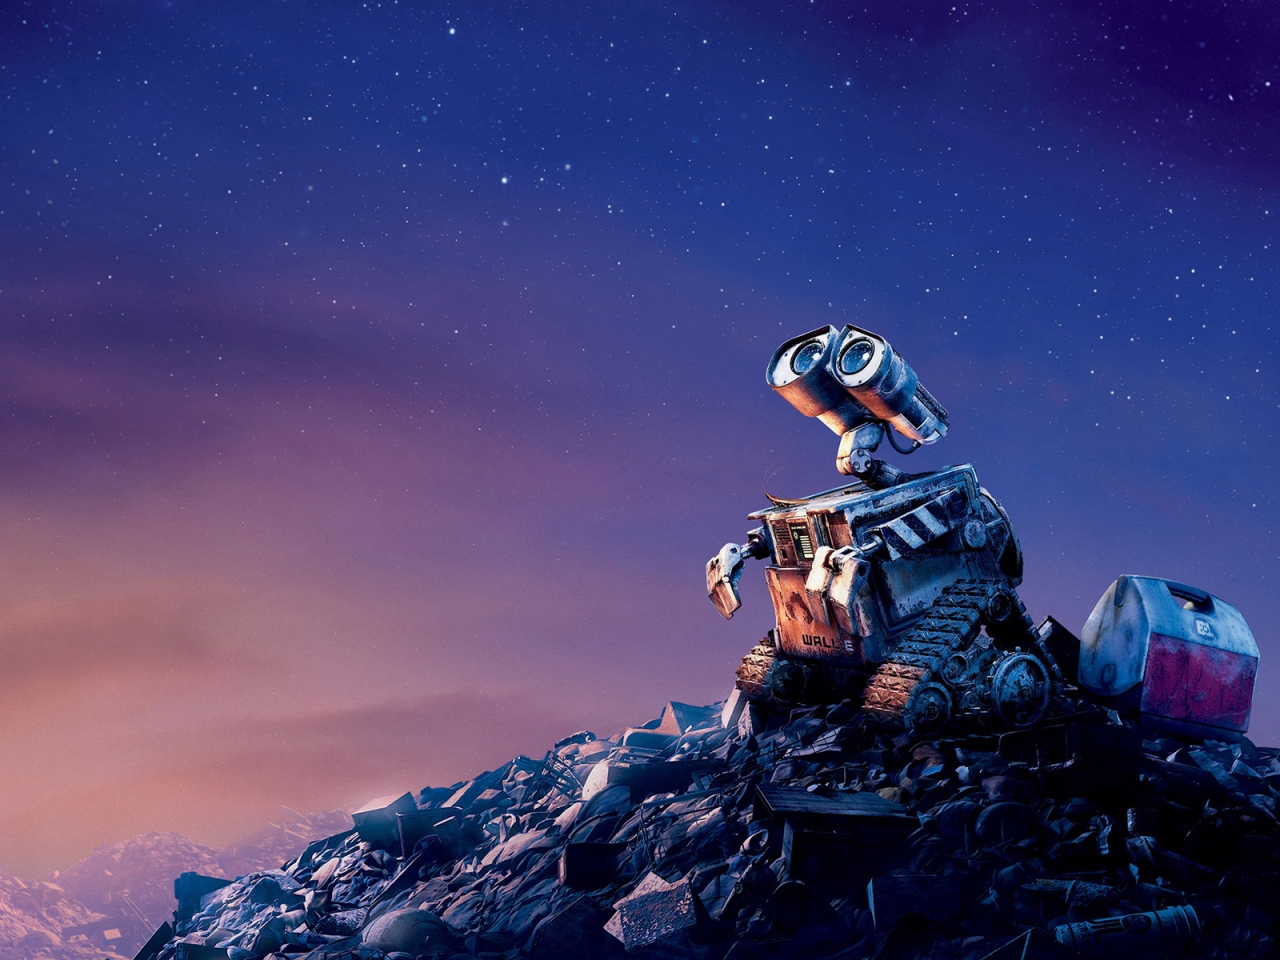 Wall-E for 1280 x 960 resolution